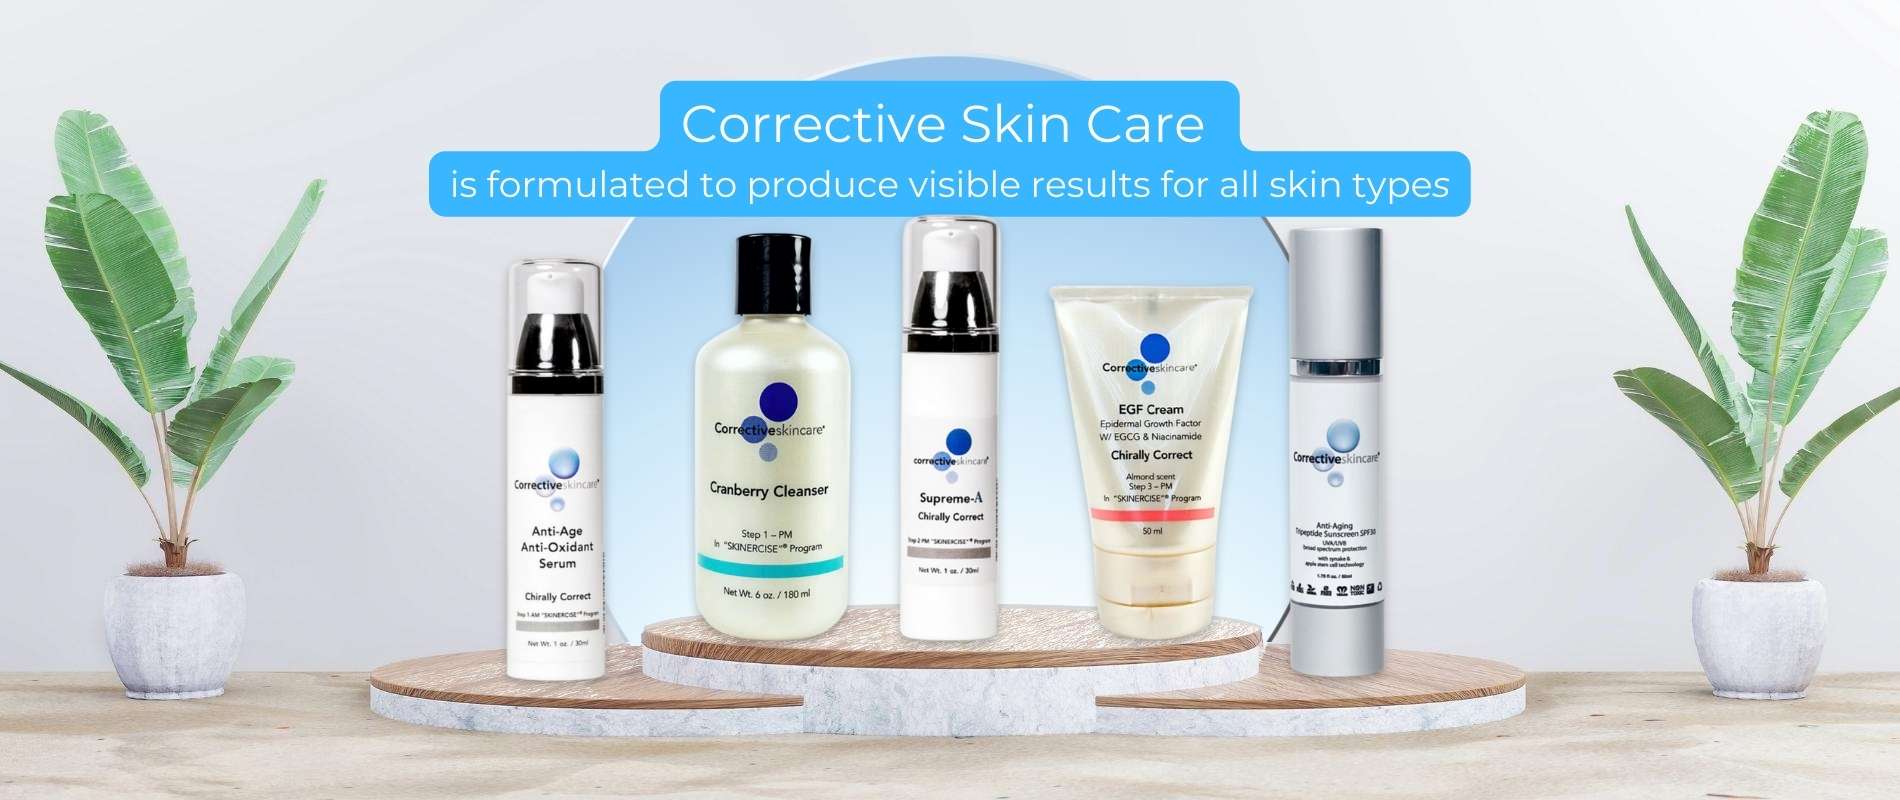 Formulated to Produce Visible Results for All Skin Types